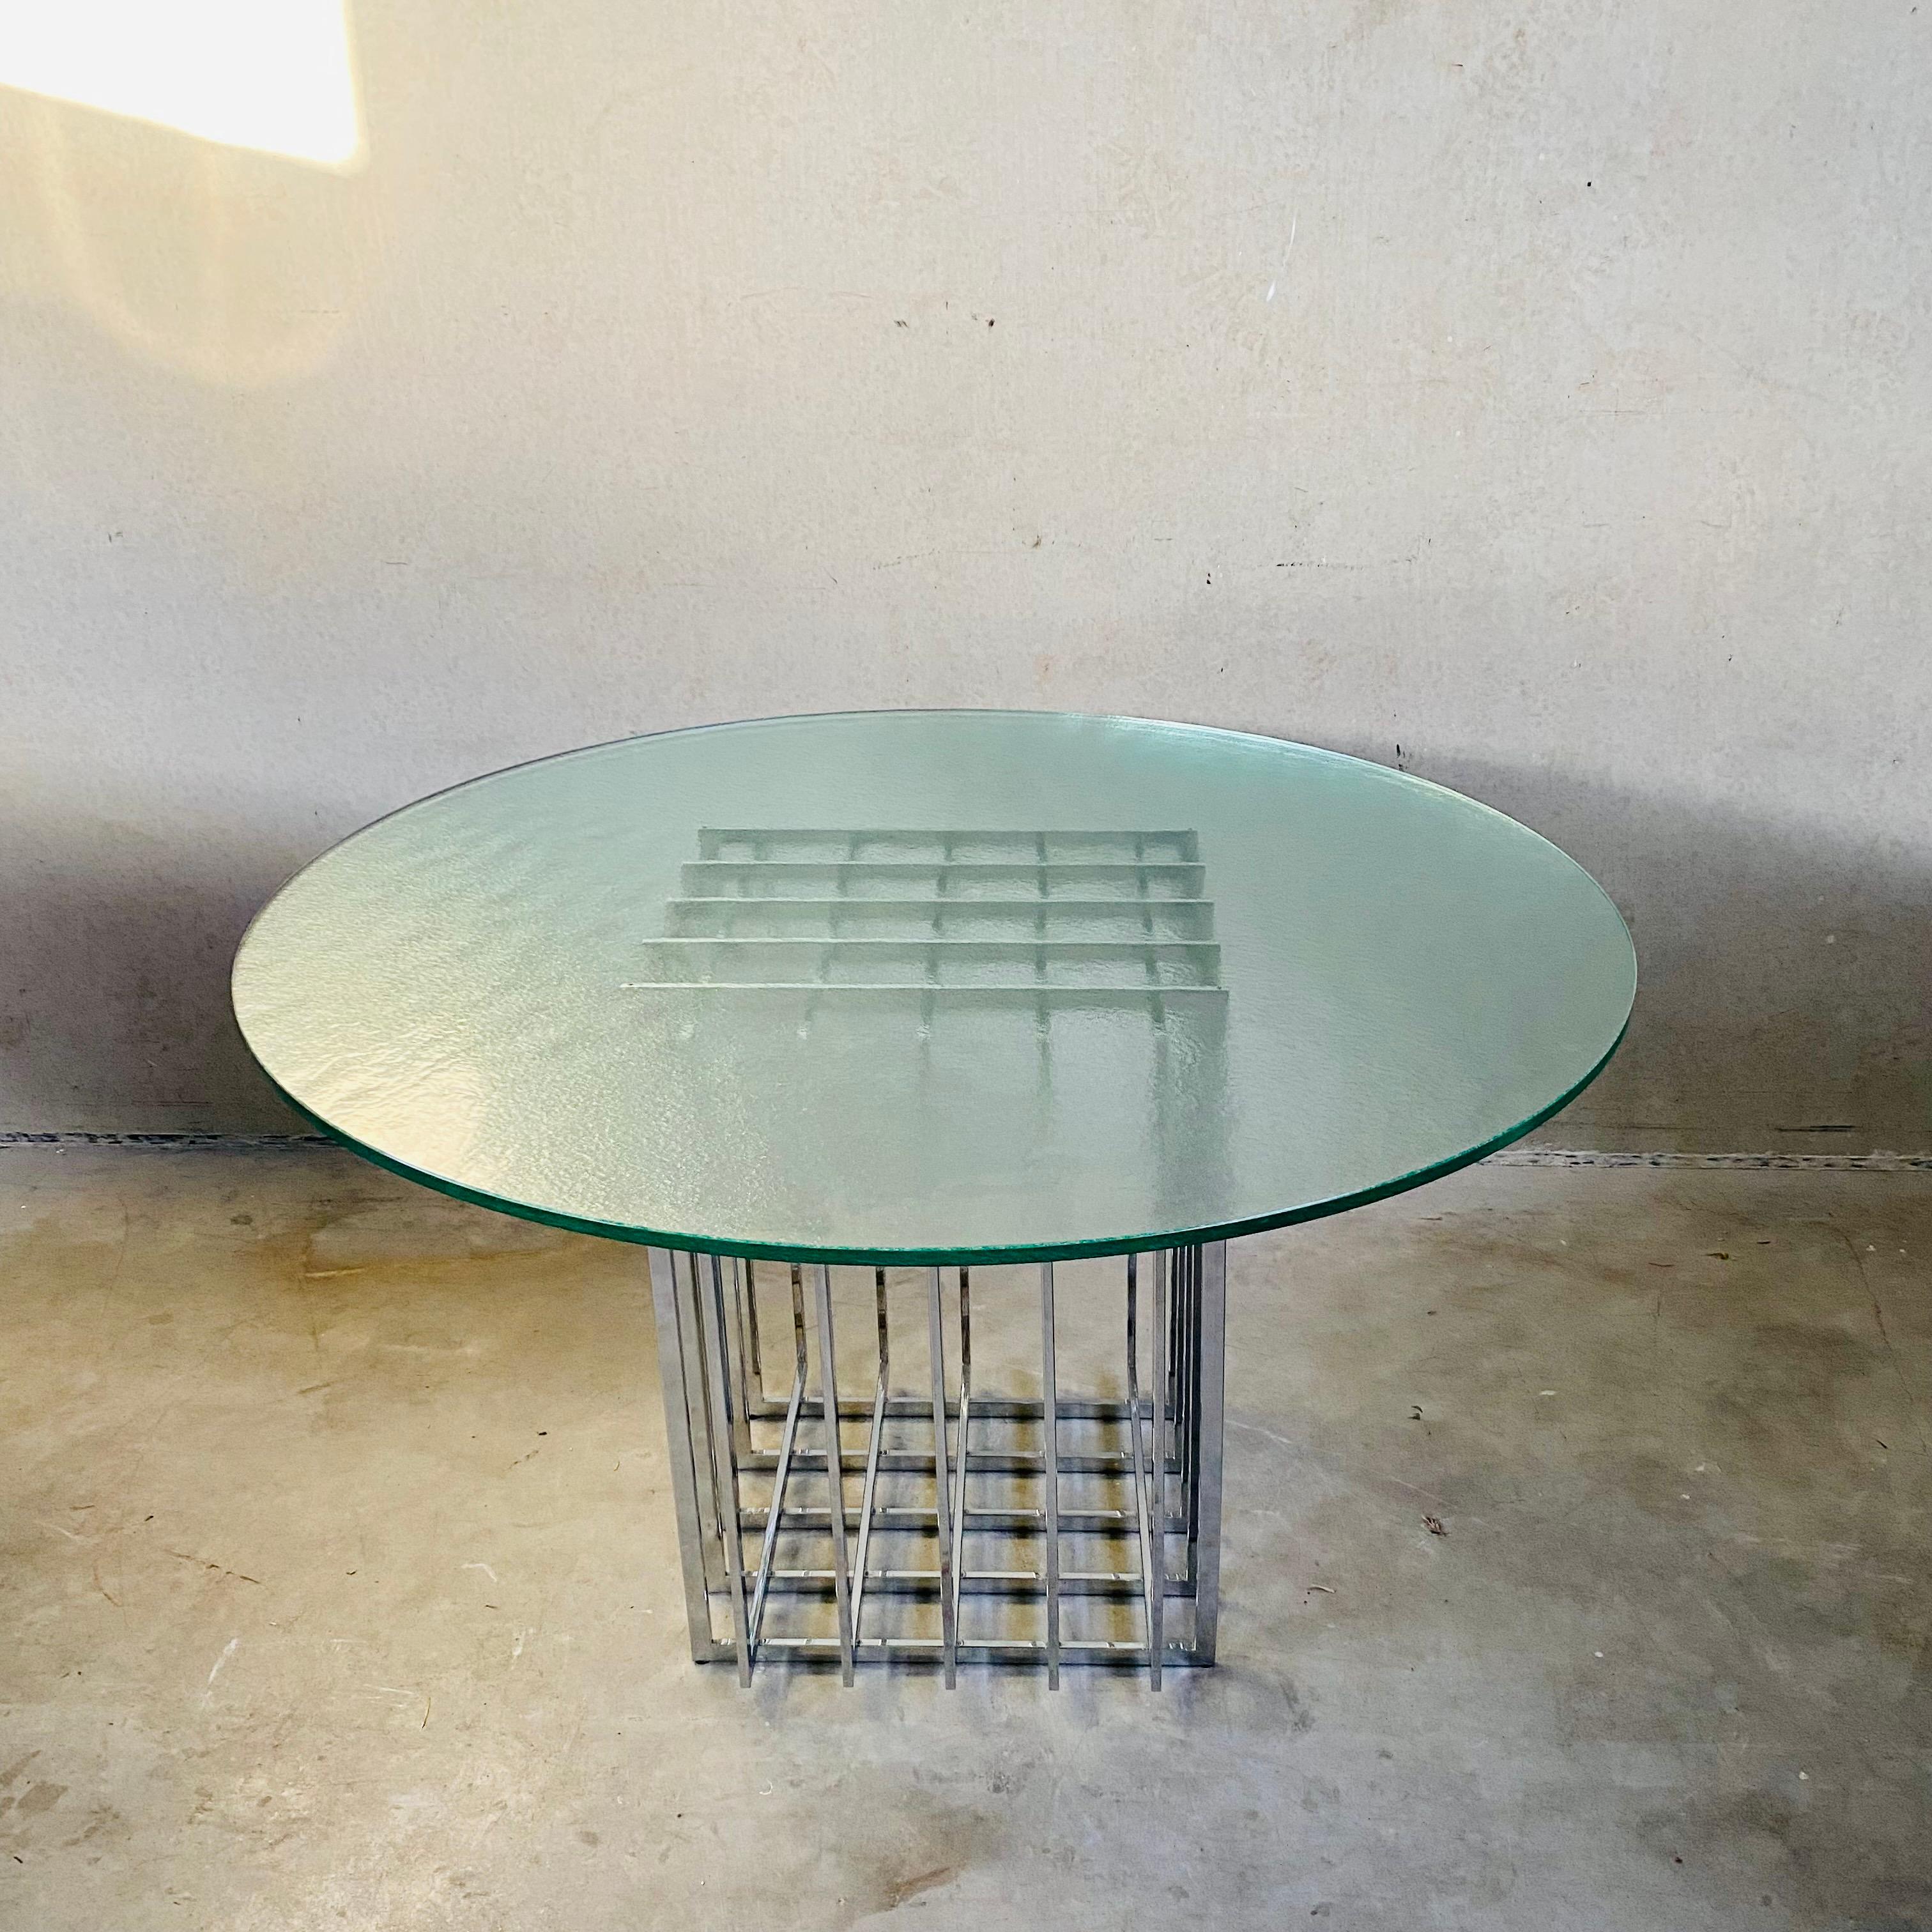 Introducing the stunning Round dining table with grid-like chromed metal base and brute glass top by Pierre Cardin model 